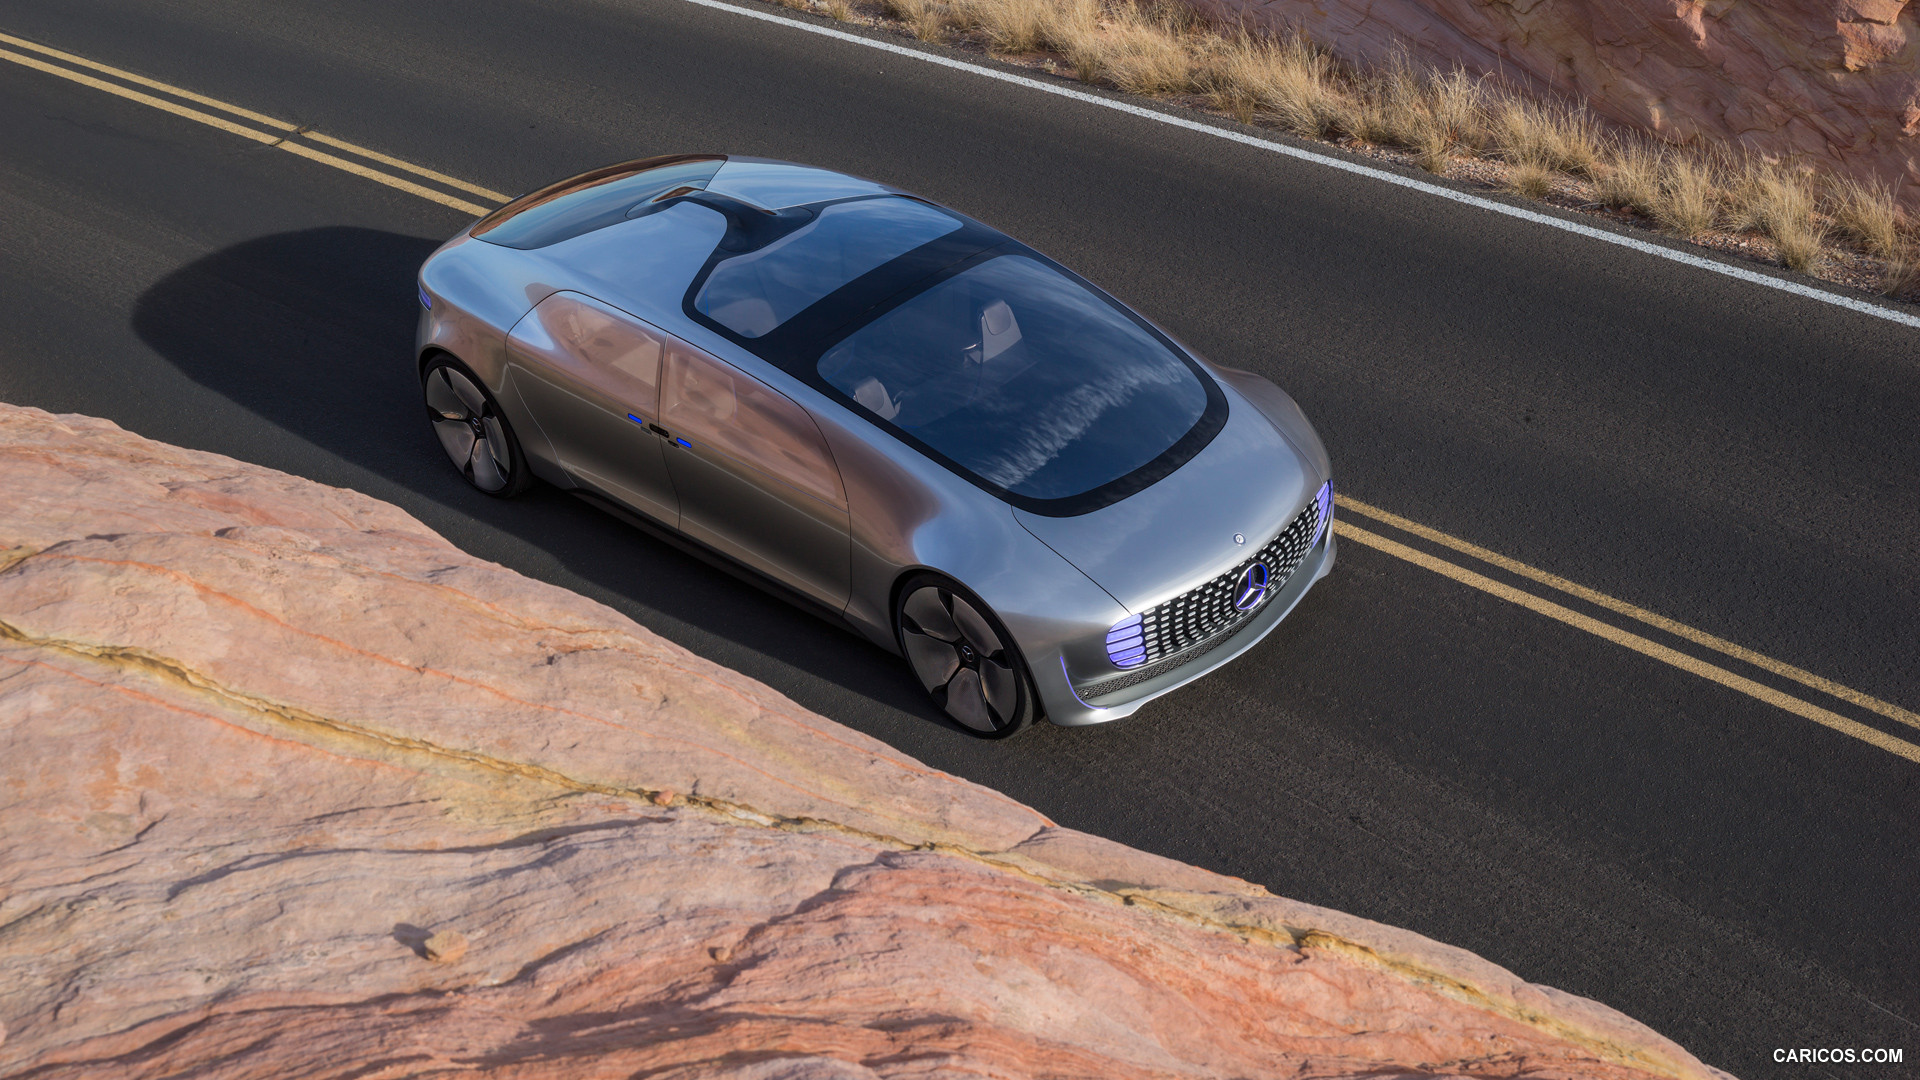 2015 Mercedes-Benz F 015 Luxury in Motion Concept  - Top, #17 of 92